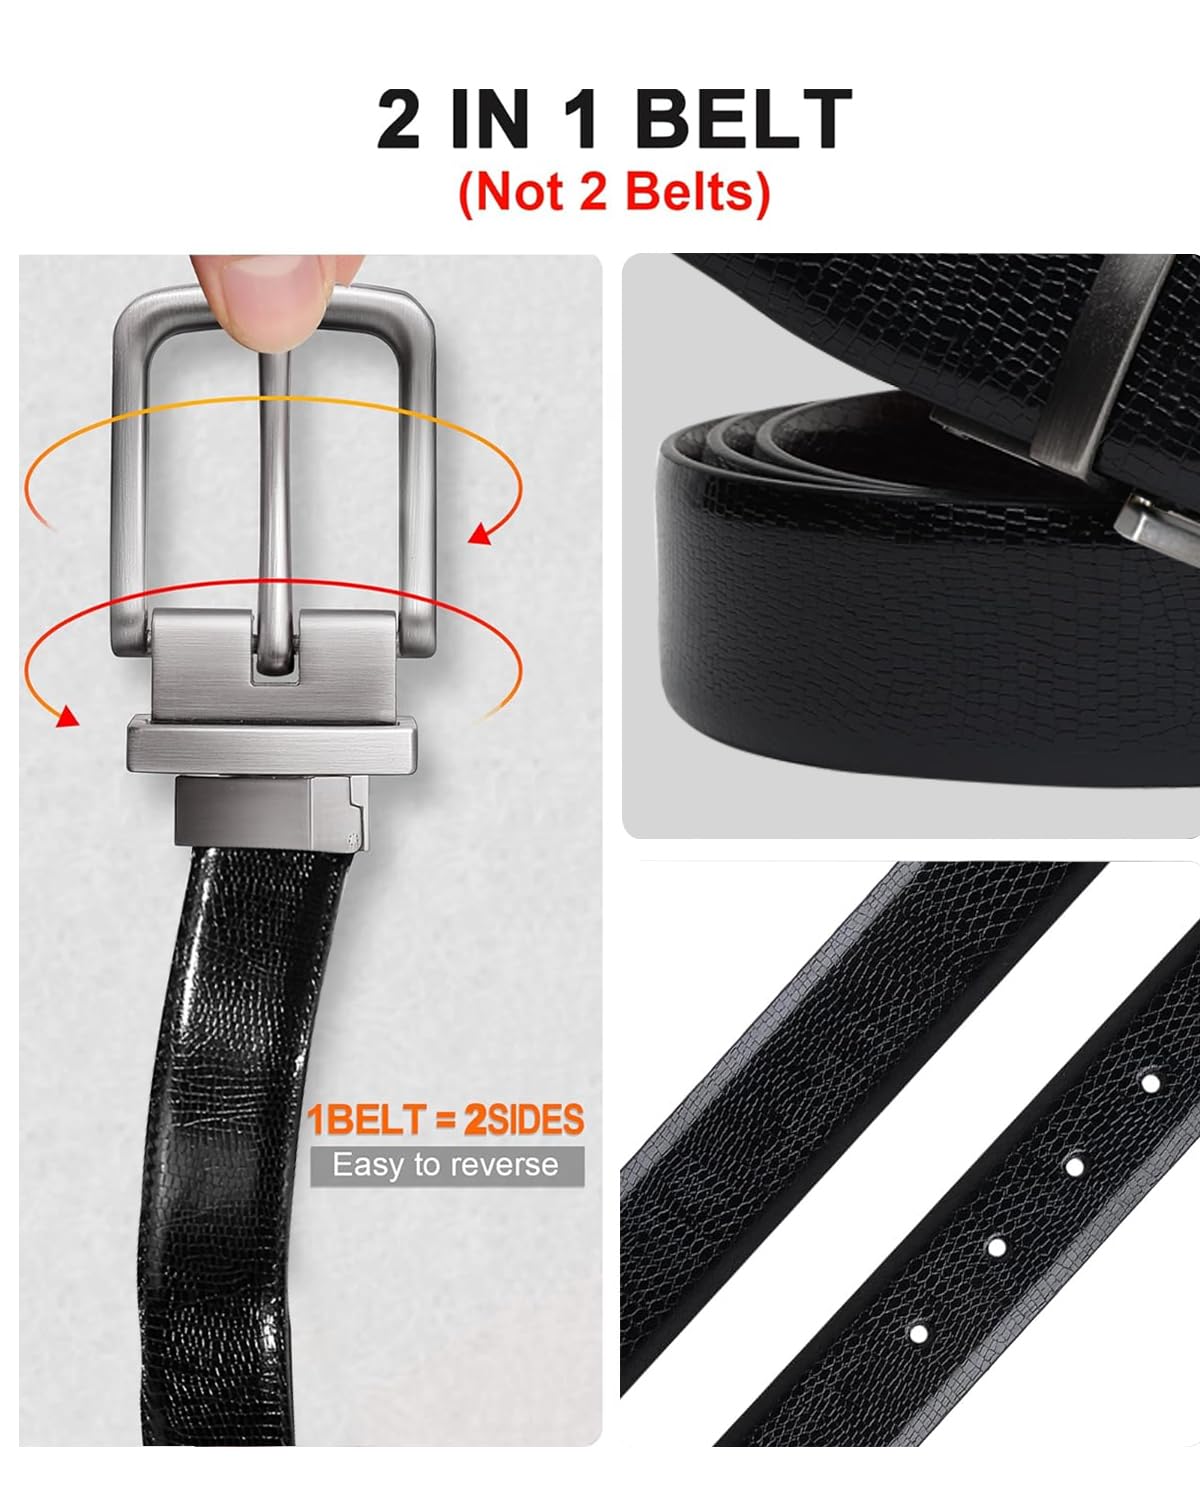 CIMONI® Reversible Vegan Leather Belt for Men with Easier Adjustable Autolock Buckle 2 in 1 Micro Adjustable Belt Fit Everywhere Formal & Casual With Elegant Gift Box (Pack of 1)